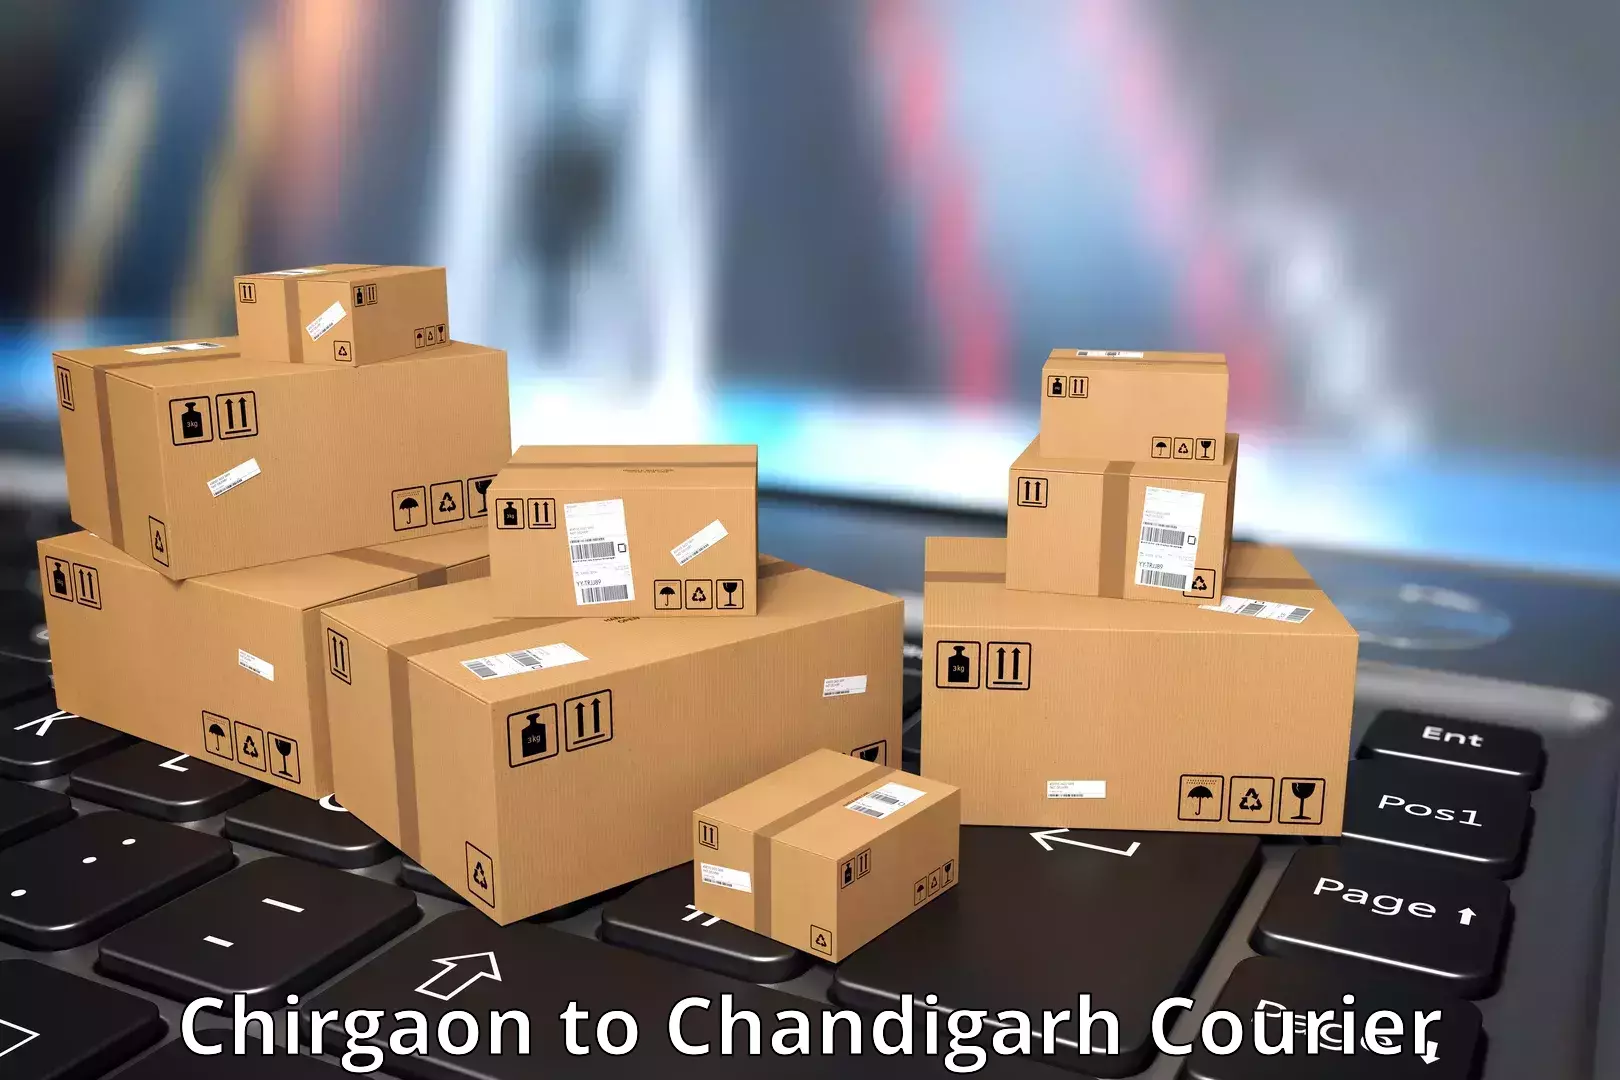 Global courier networks Chirgaon to Chandigarh